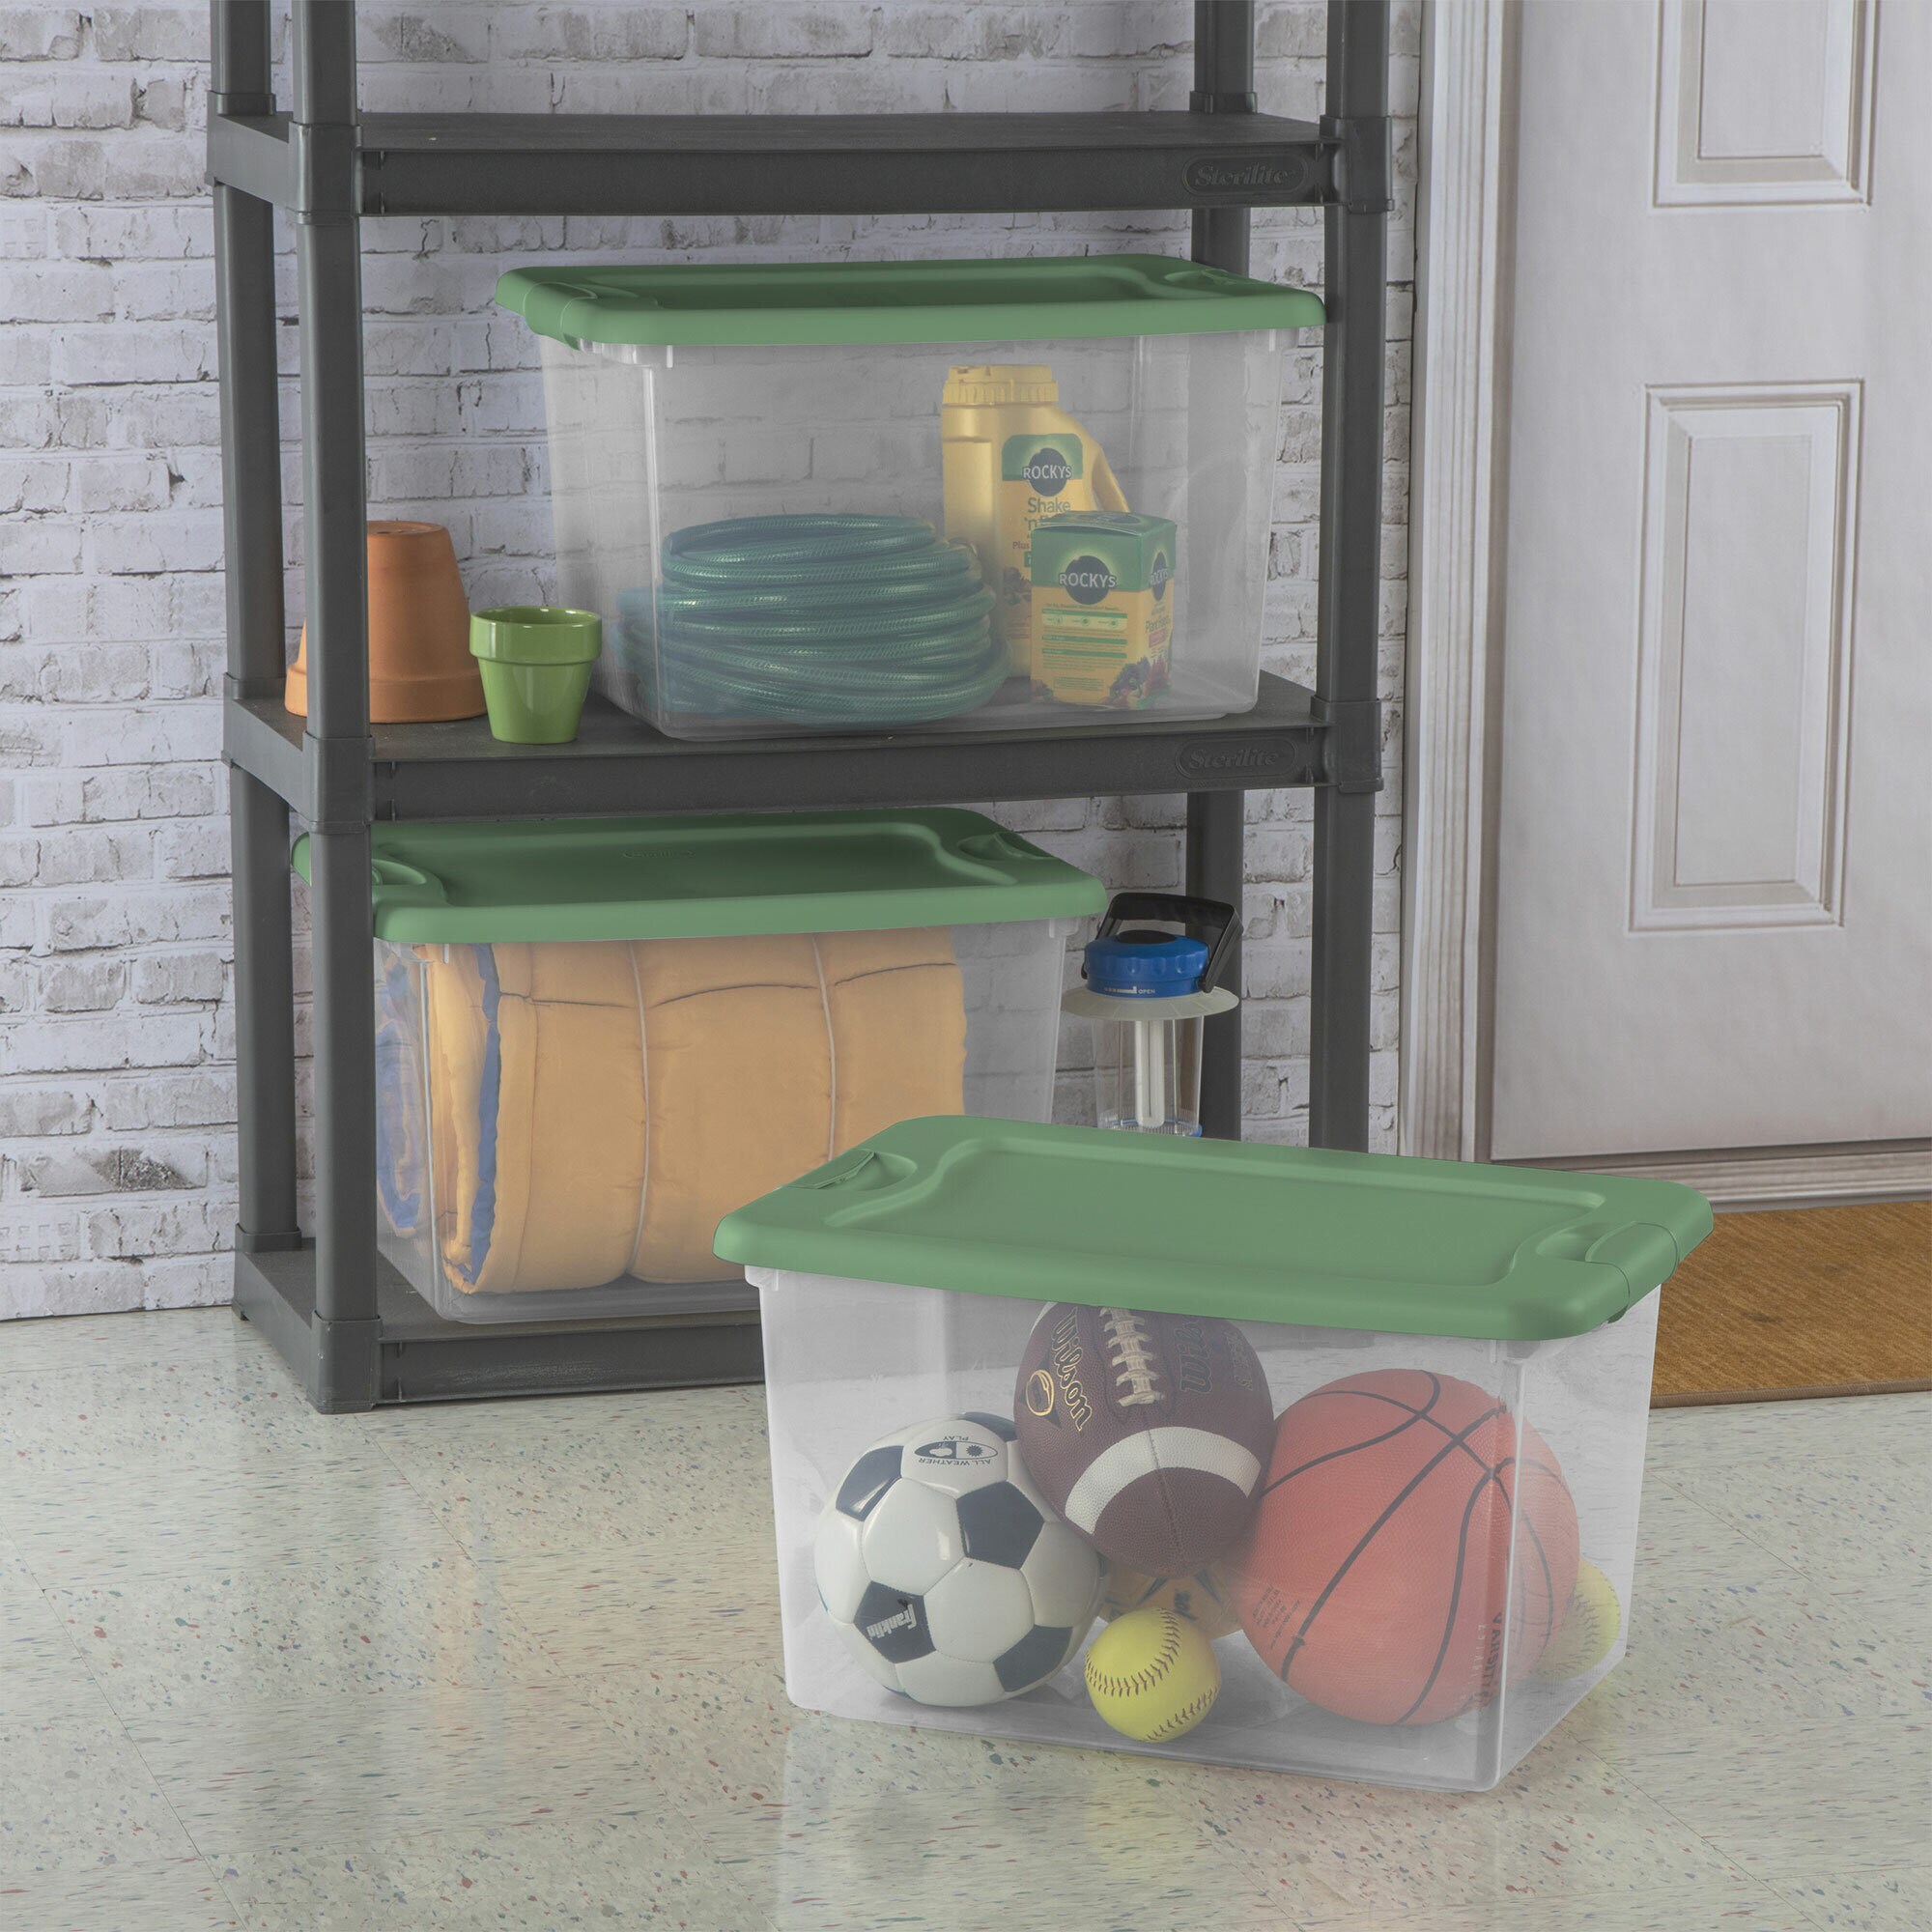  Sterilite 18 Gal Storage Tote, Stackable Bin with Lid, Plastic  Container to Organize Clothes in Closet, Basement, Crisp Green Base and  Lid, 8-Pack : Home & Kitchen